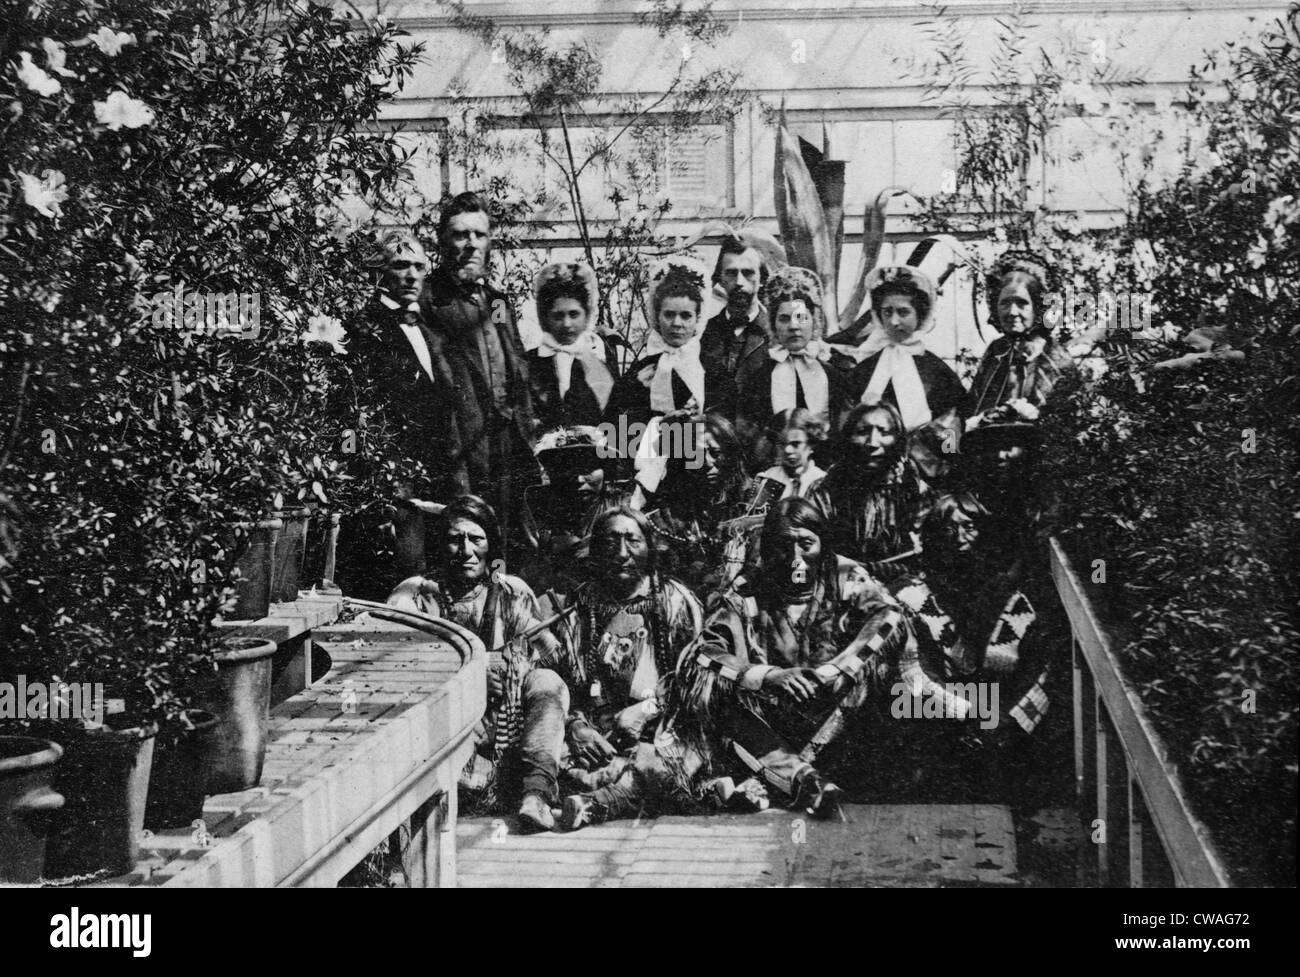 Mary Todd Lincoln (standing at far right) in a group photo with a Southern Plains Indian delegation taken in the White House Stock Photo